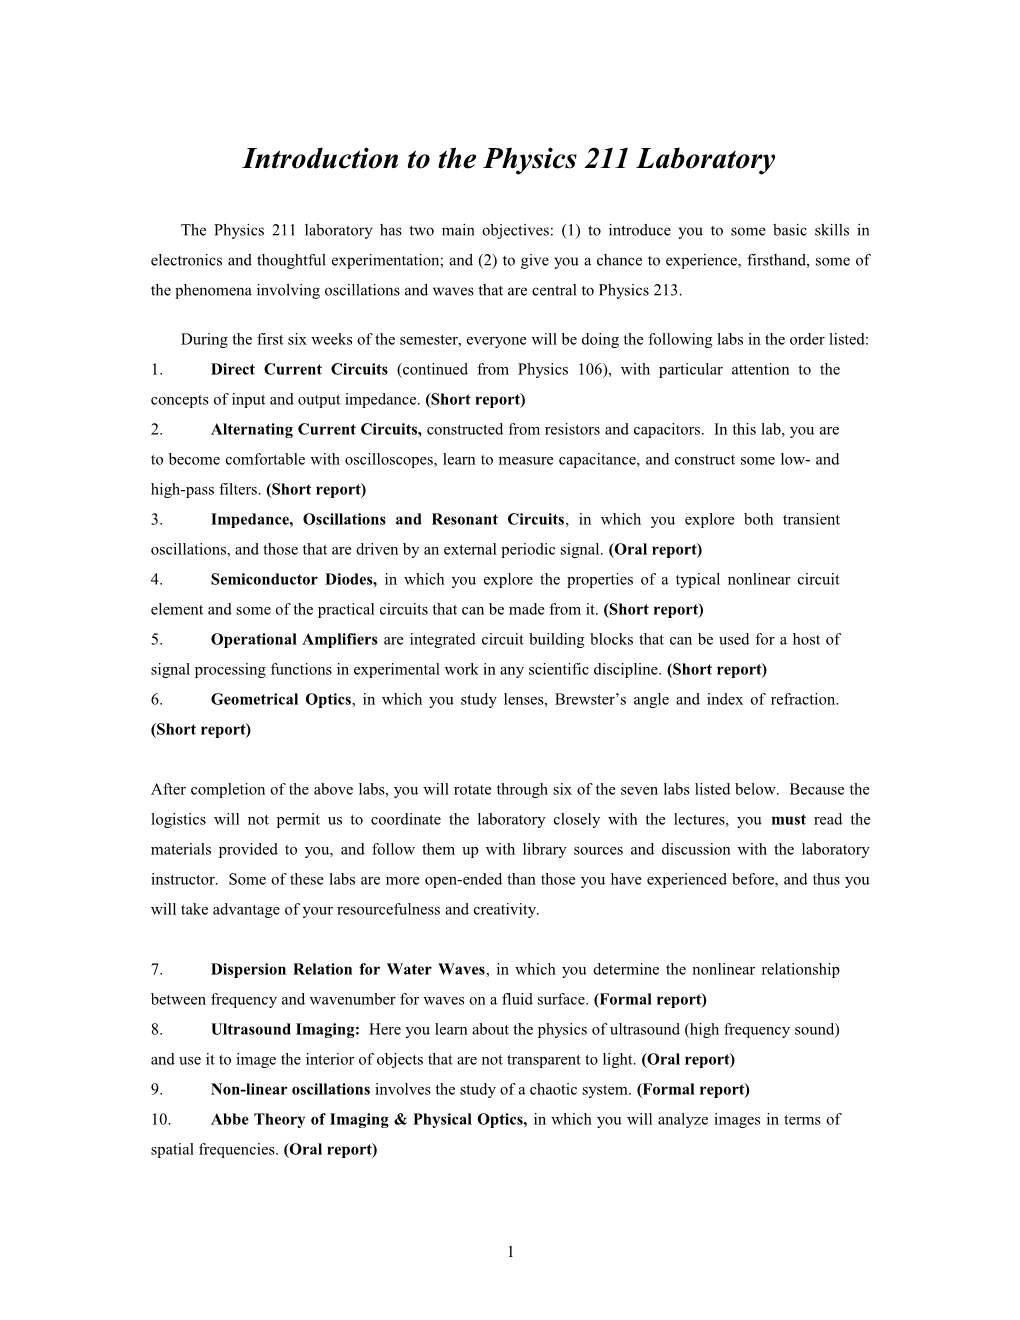 Introduction to the Physics 211 Laboratory